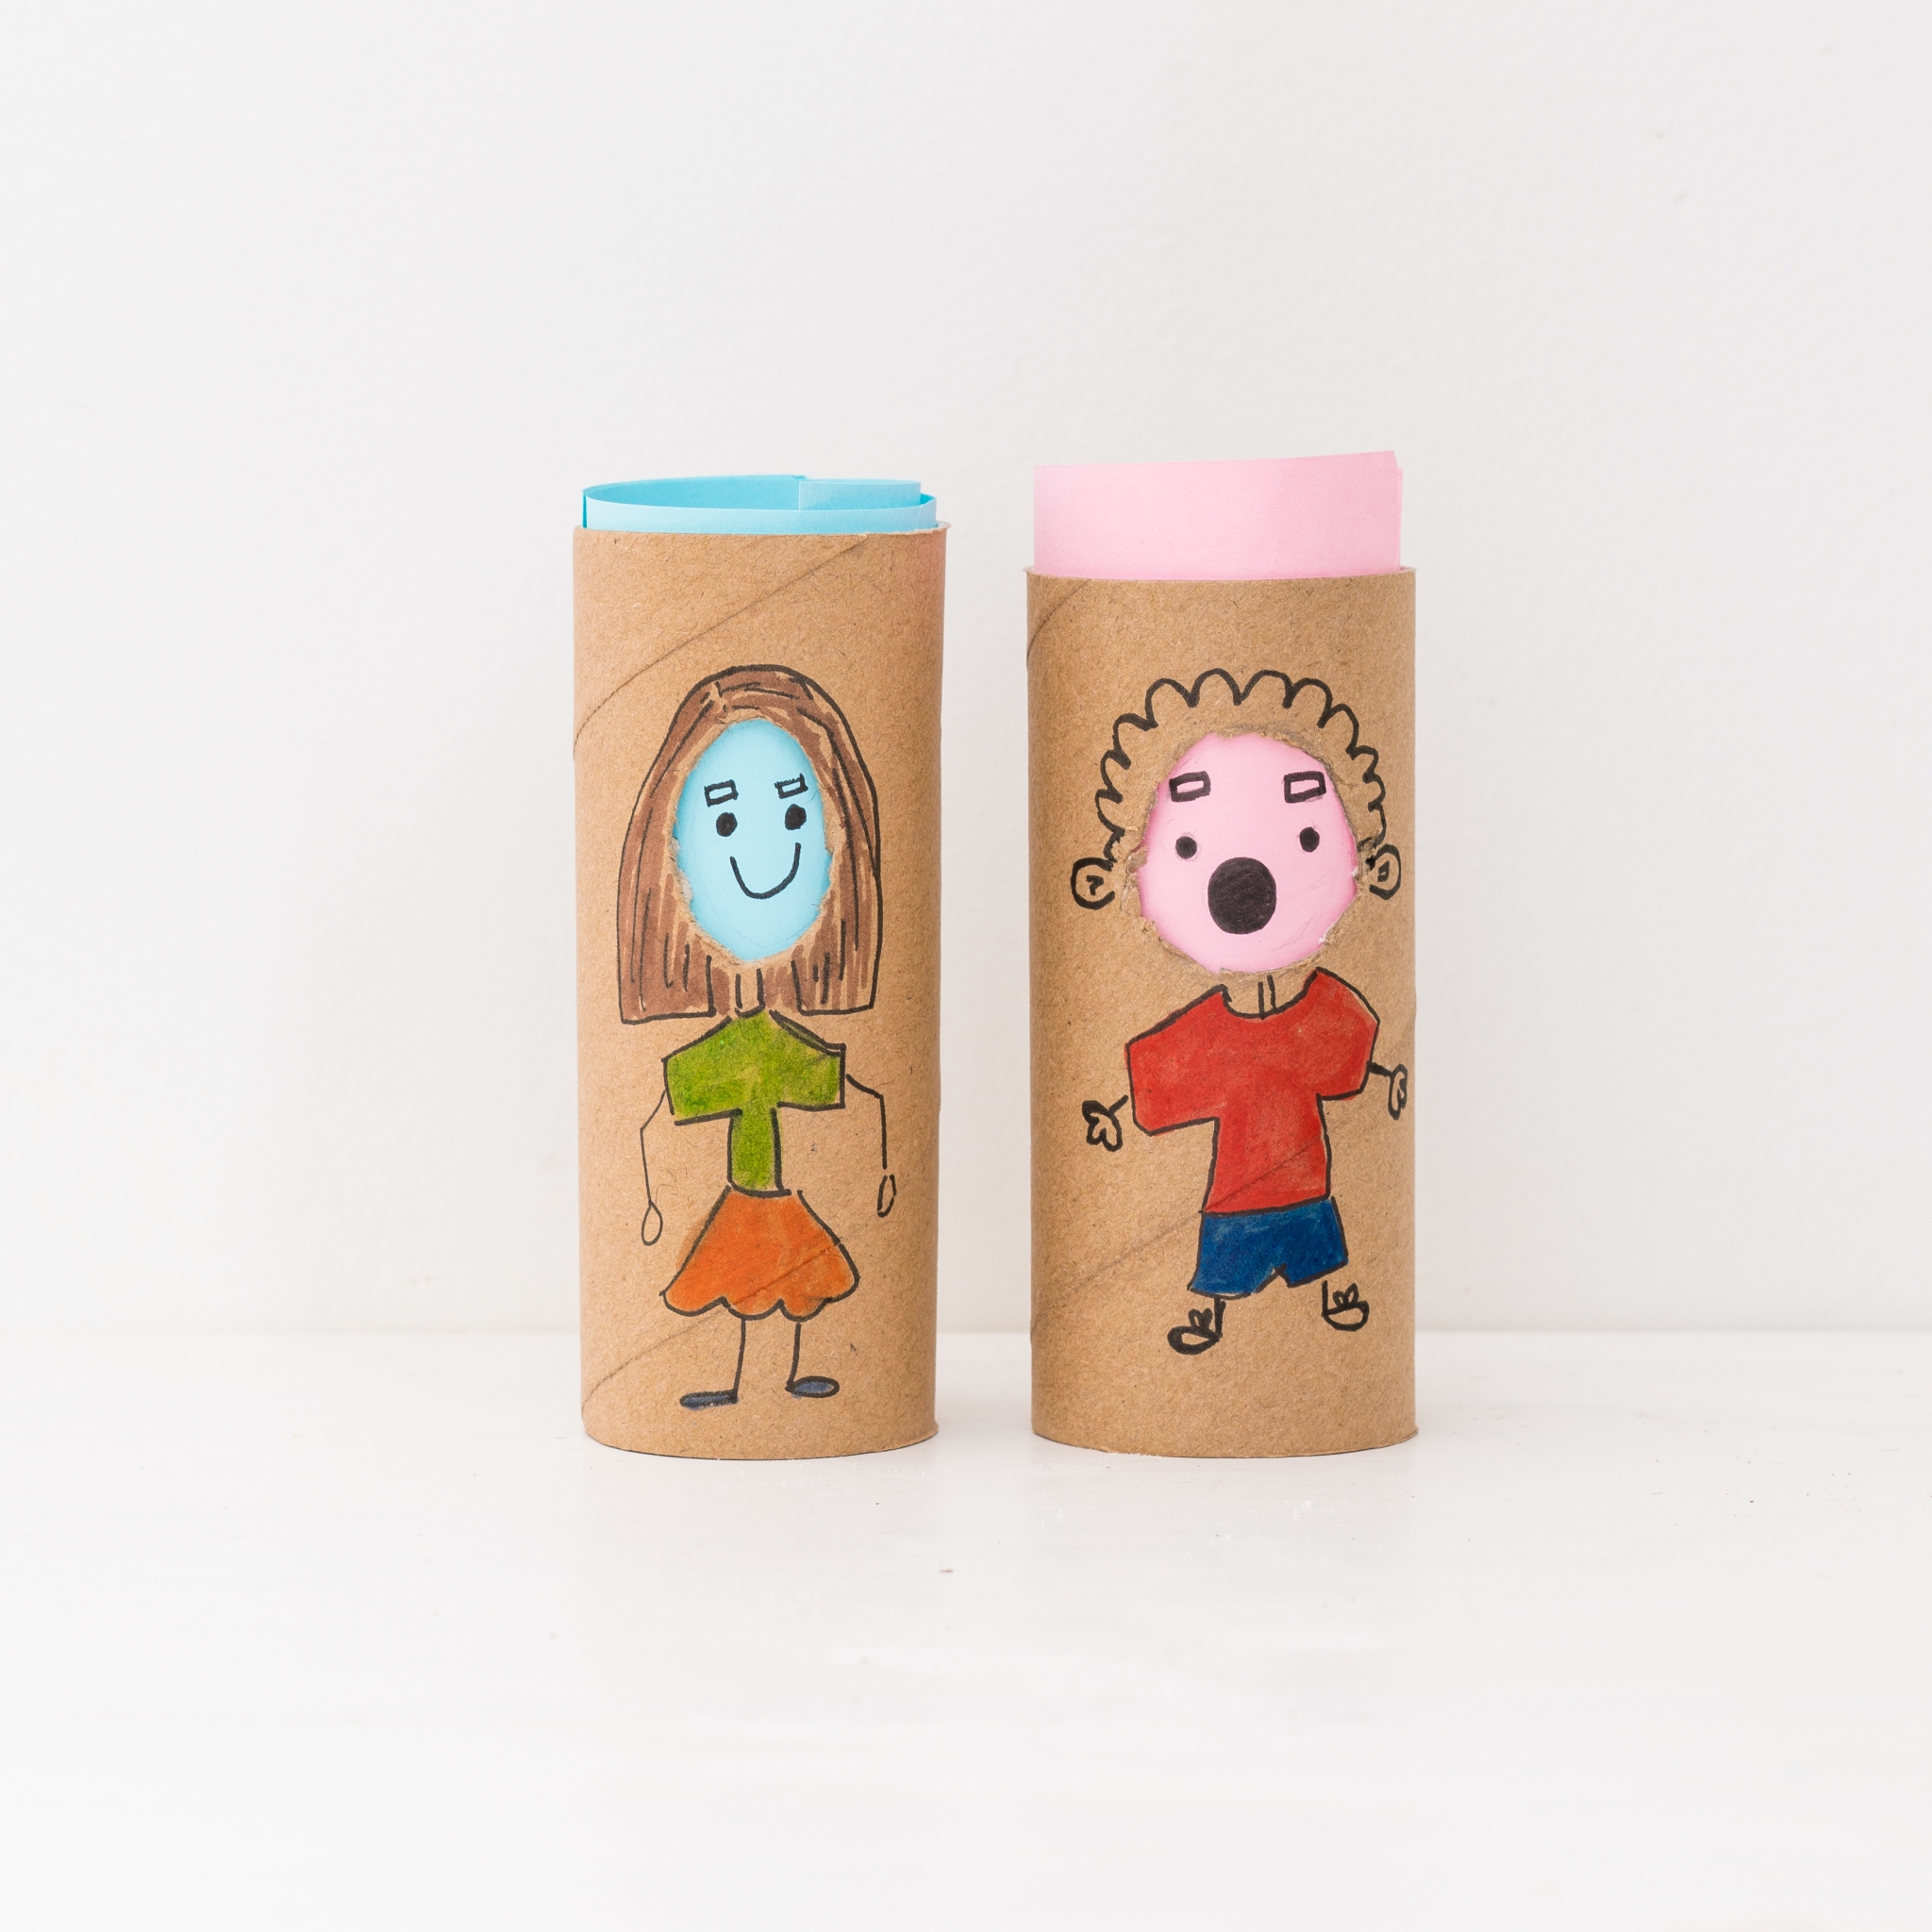 30+ Toilet Paper Roll Crafts for Kids